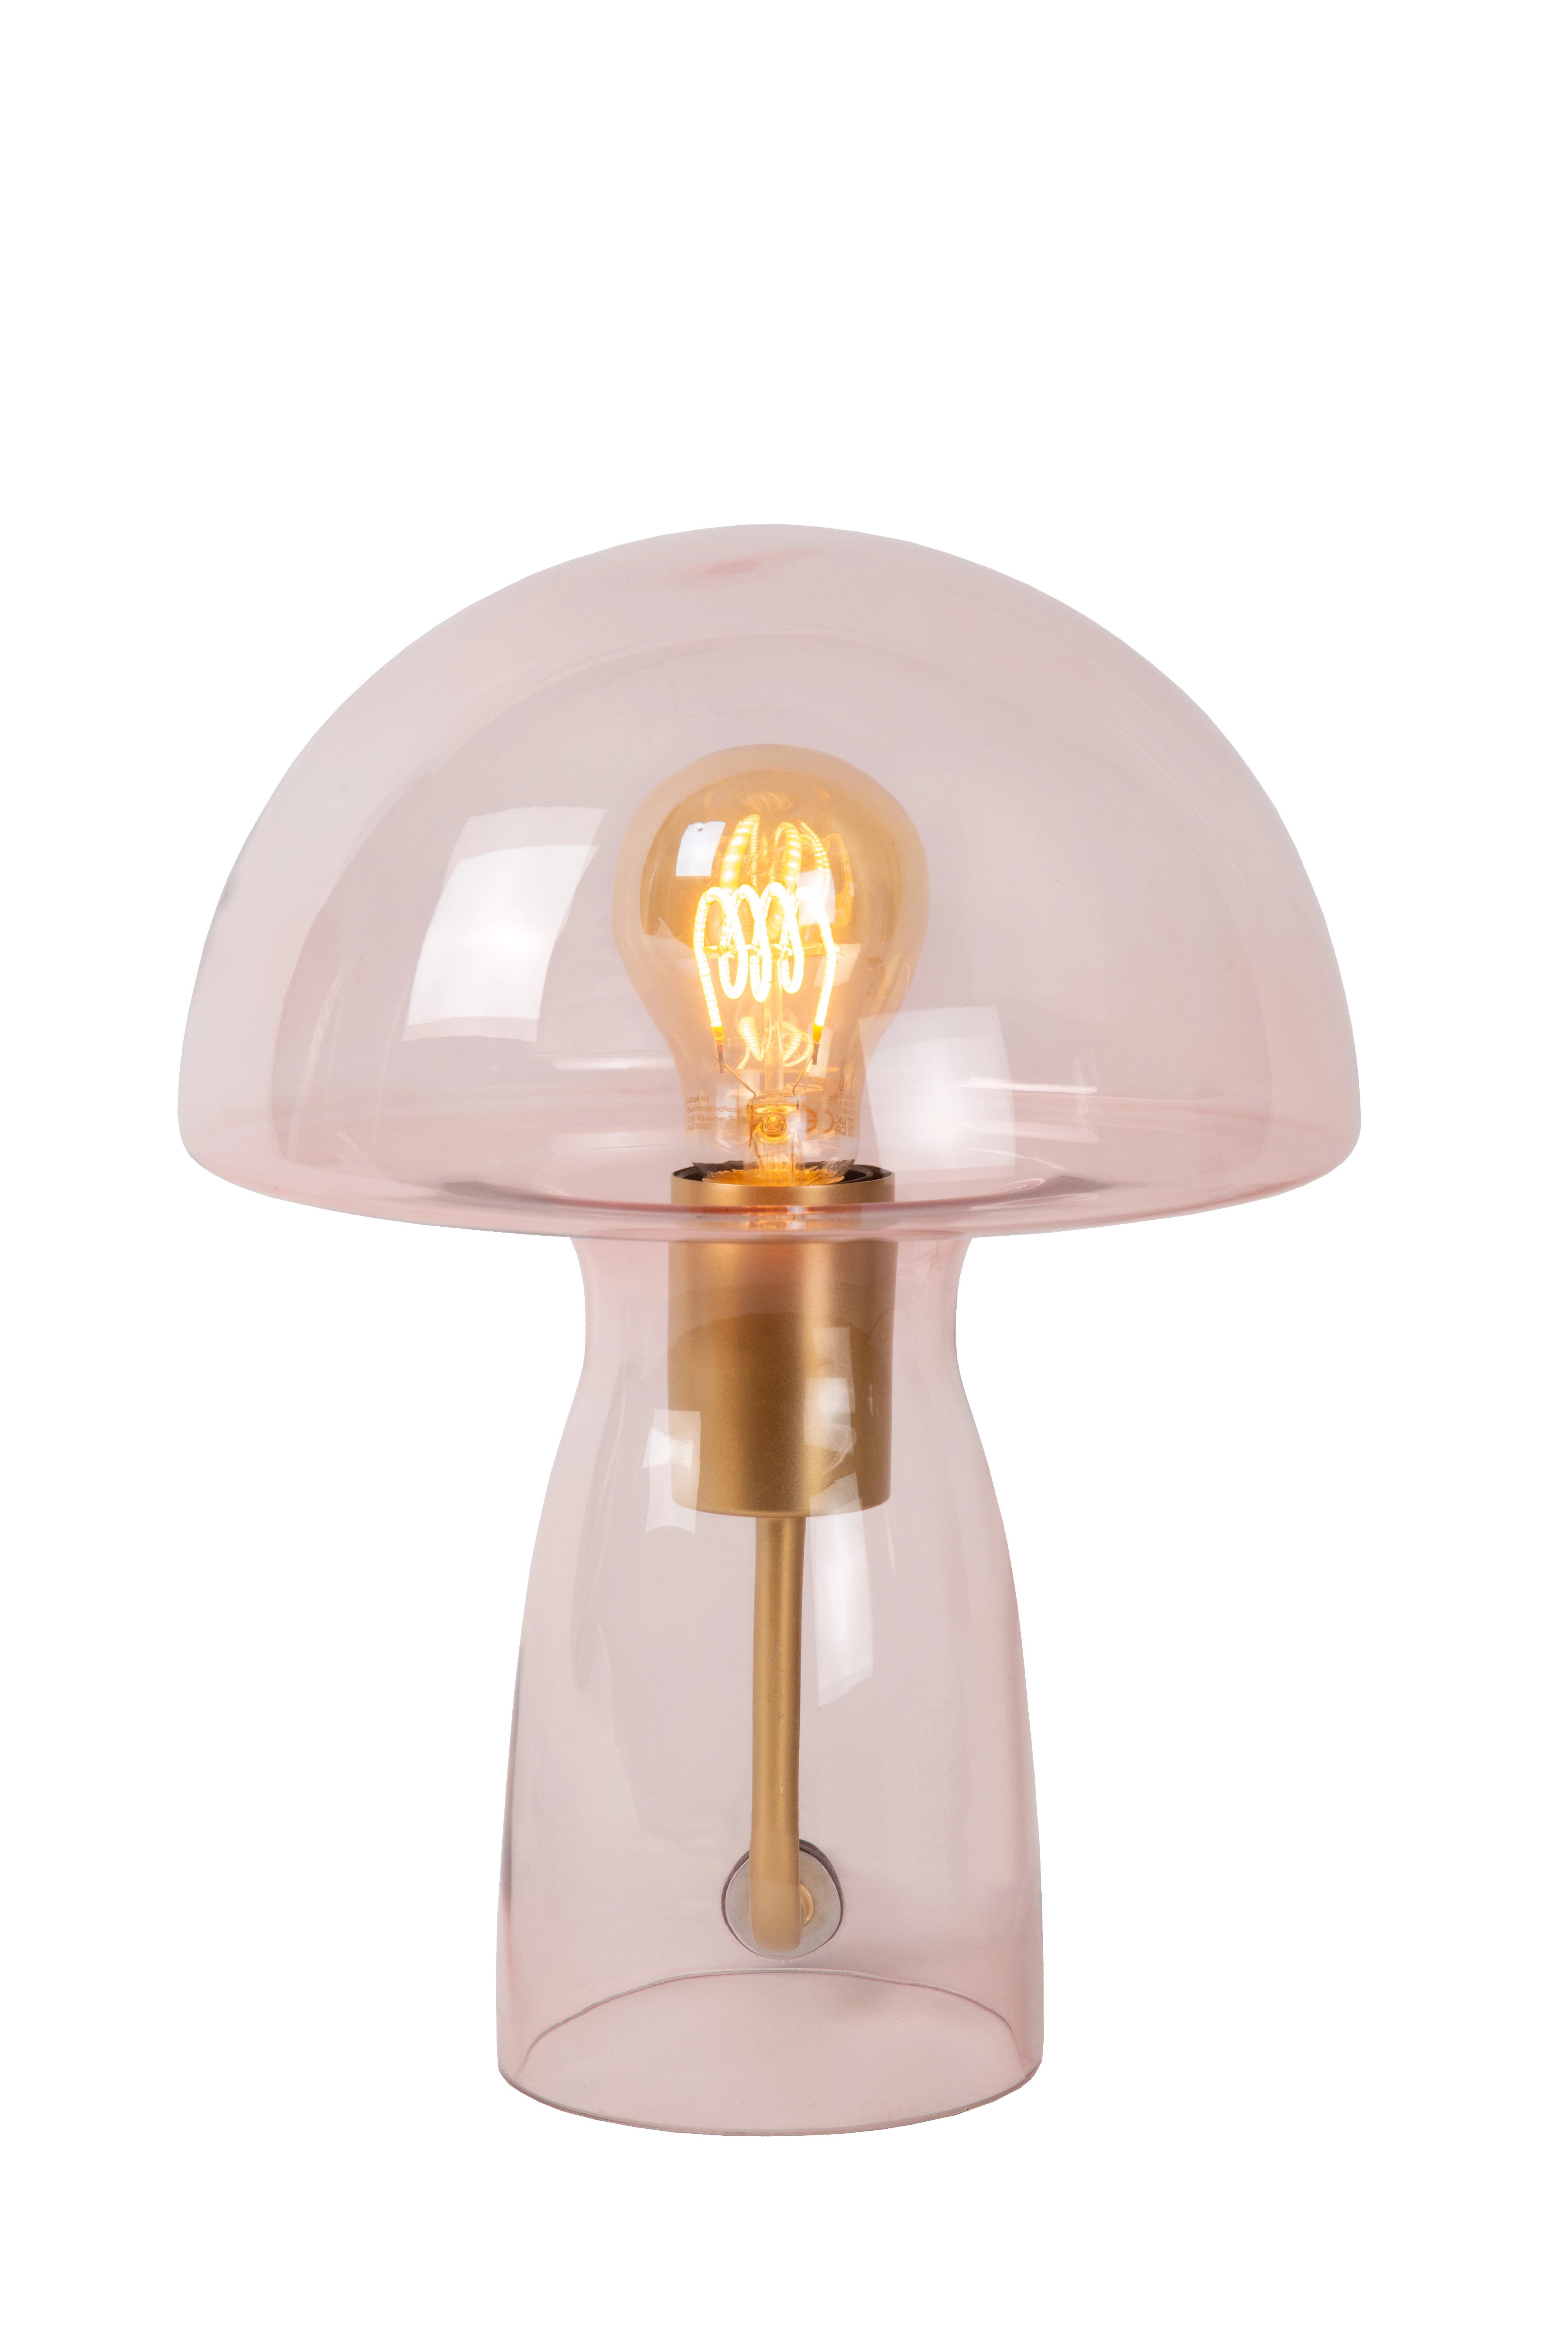 LU 10514/01/66 Lucide FUNGO - Table lamp - 1xE27 - Pink